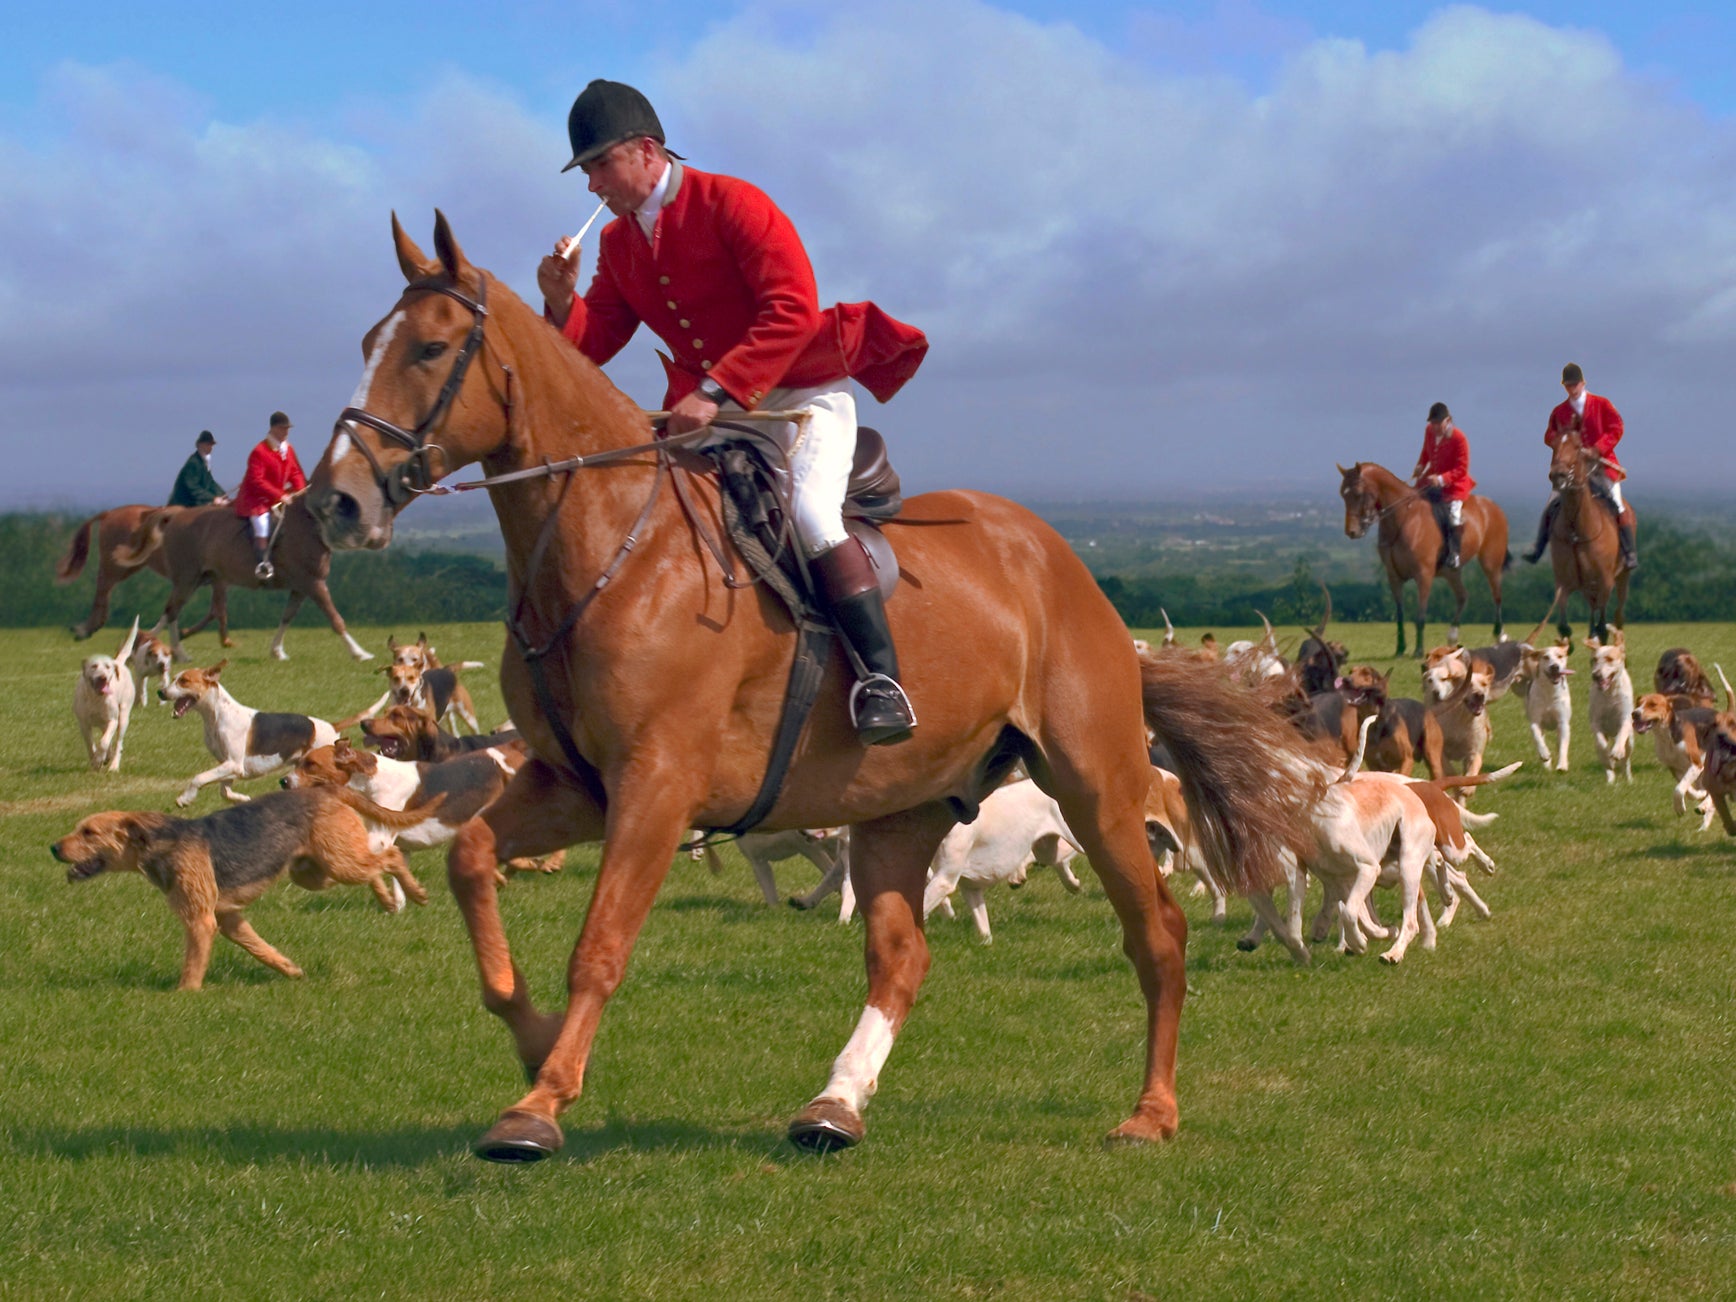 More than a million acres of countryside are now out of bounds to hunts